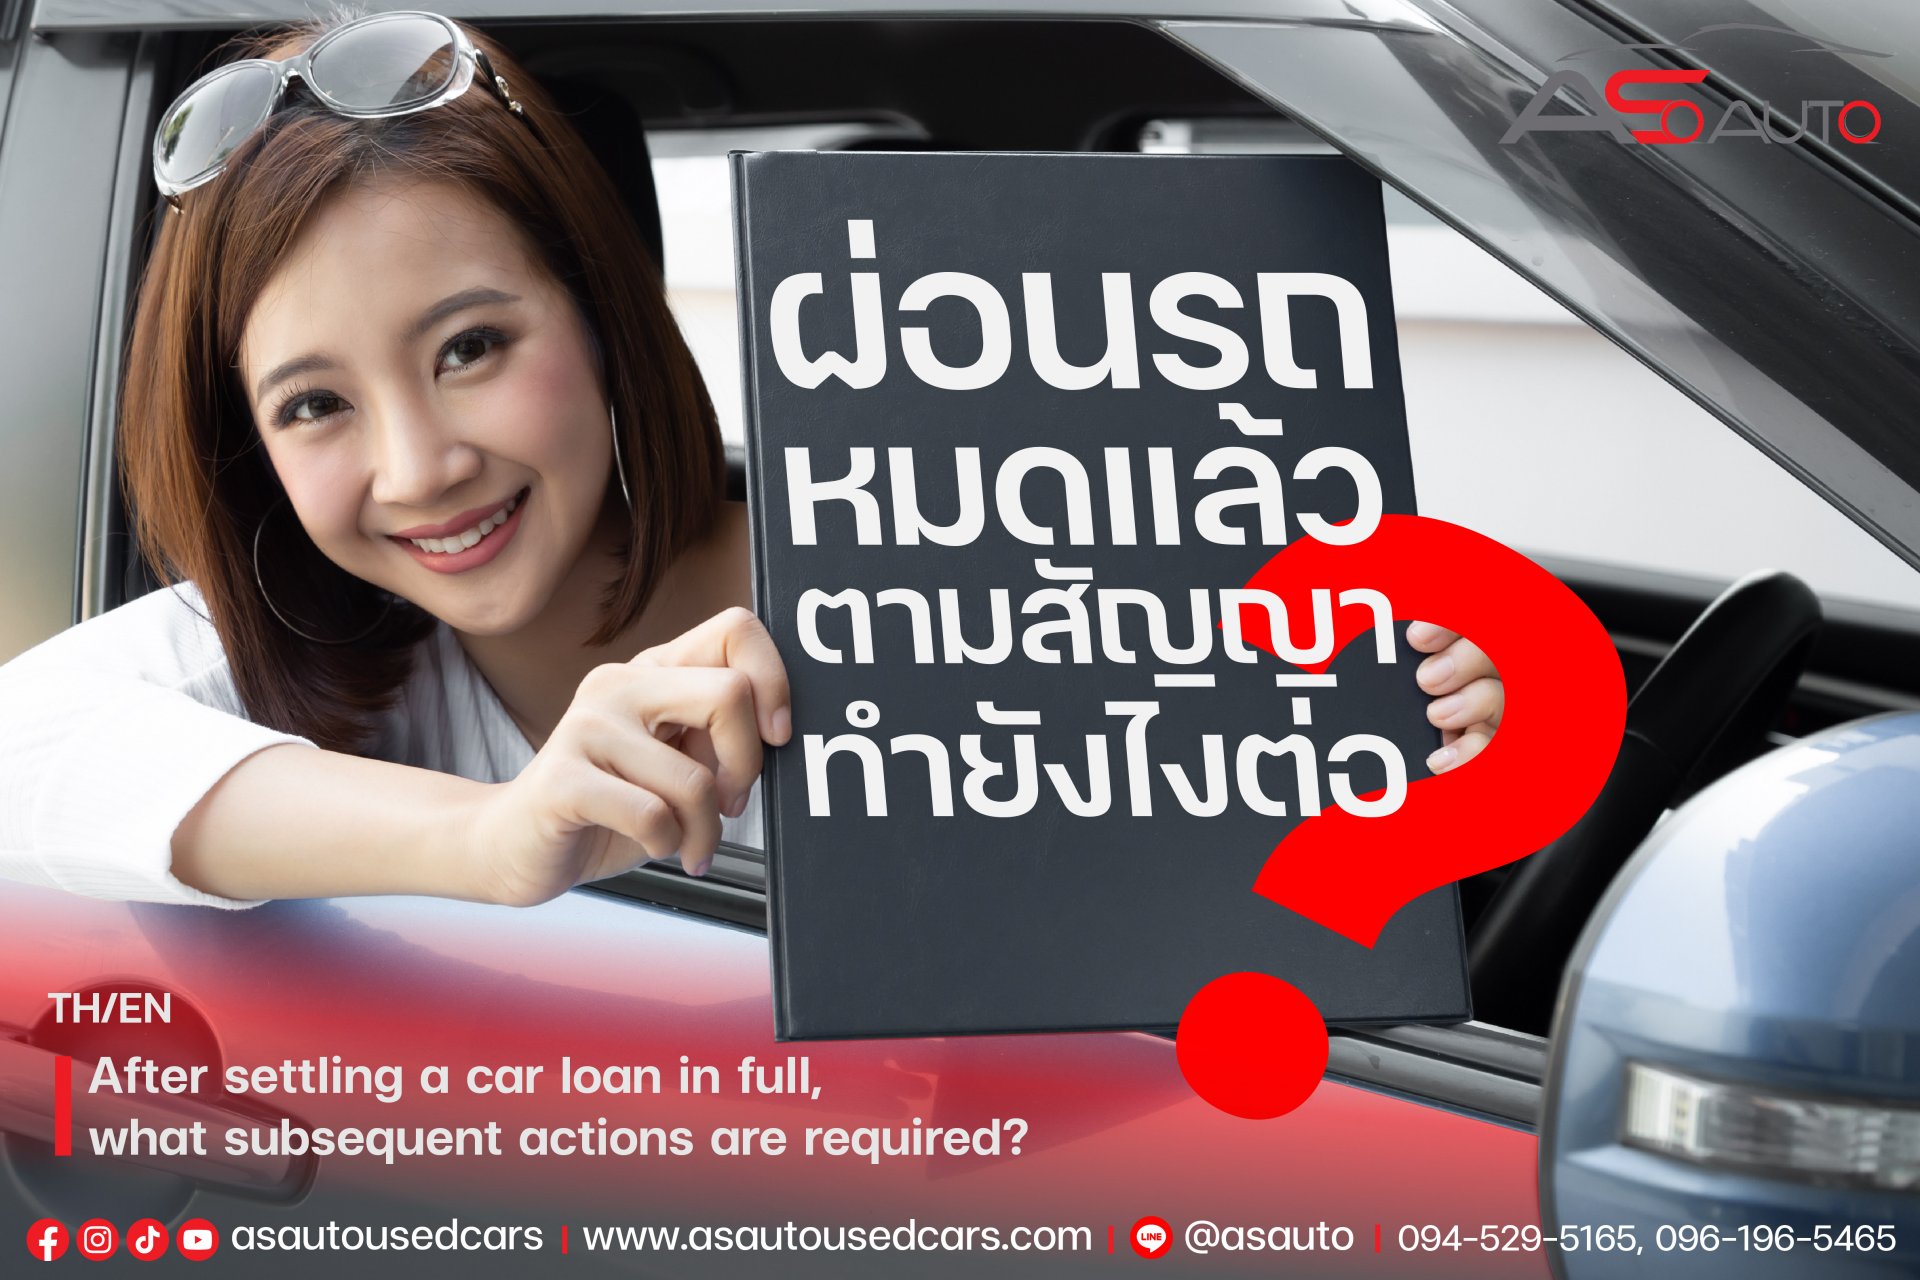 After settling a car loan in full, what subsequent actions are required?